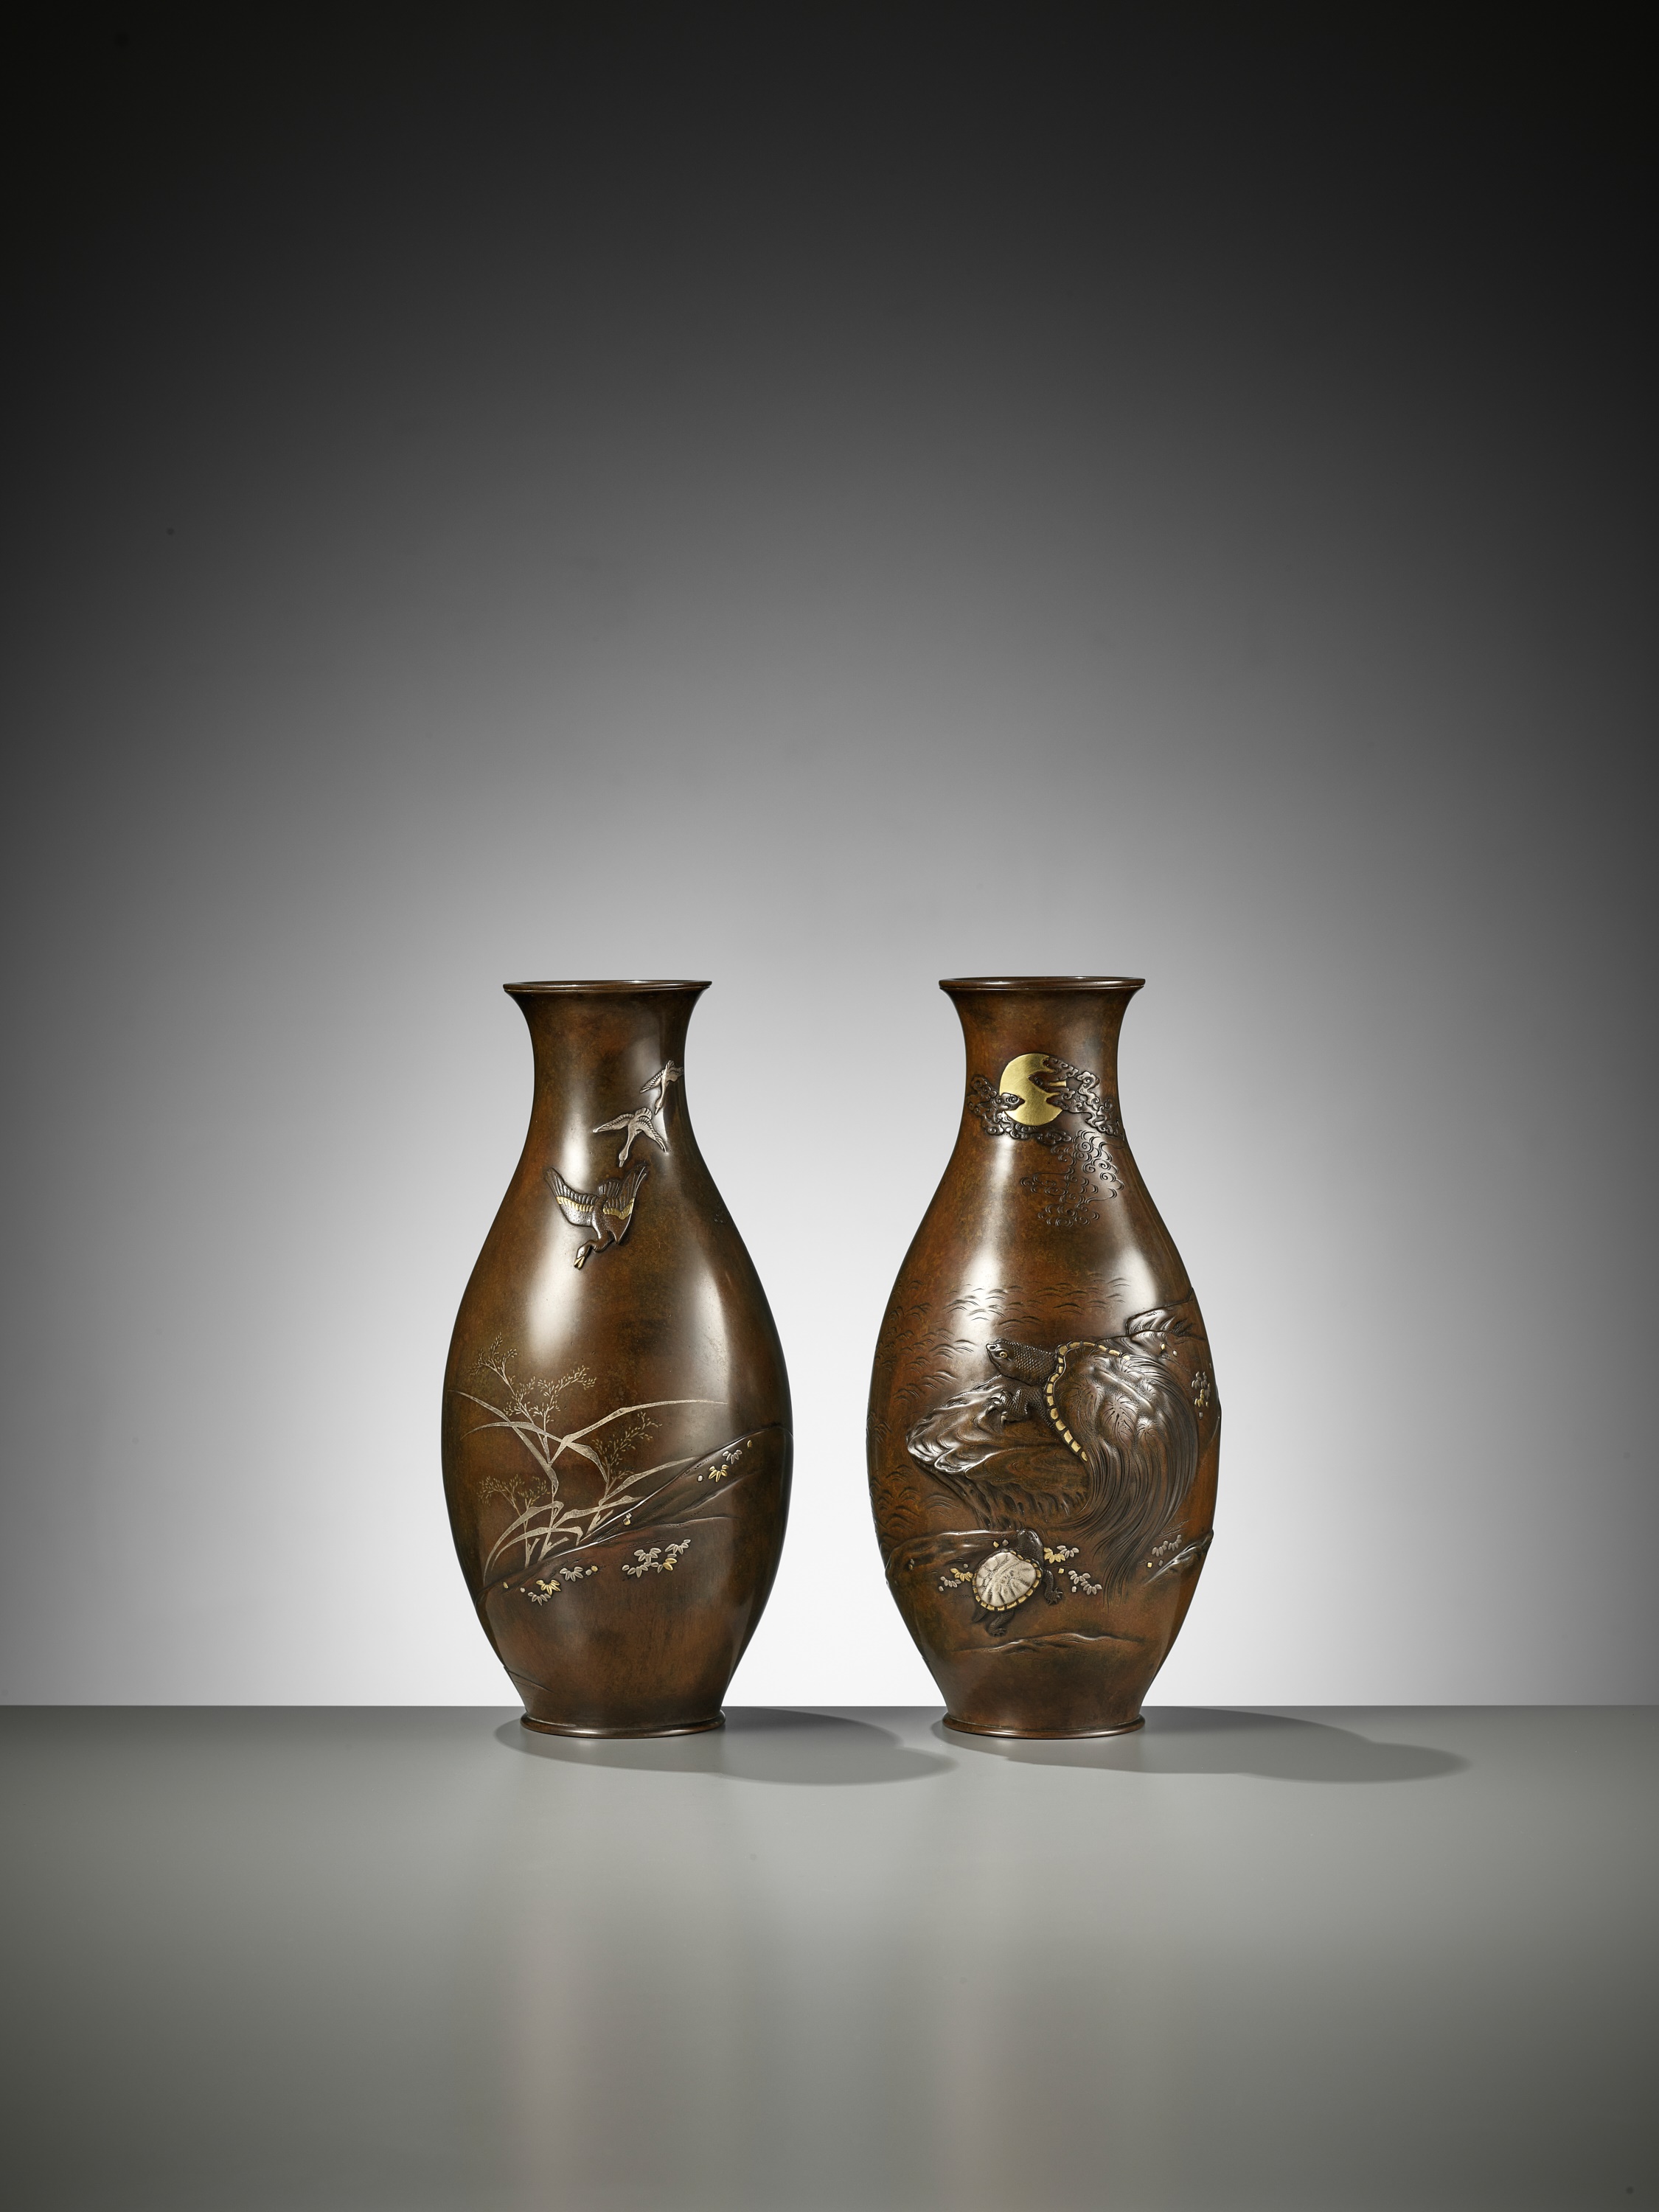 CHOMIN: A SUPERB PAIR OF INLAID BRONZE VASES WITH MINOGAME AND GEESE - Image 5 of 11